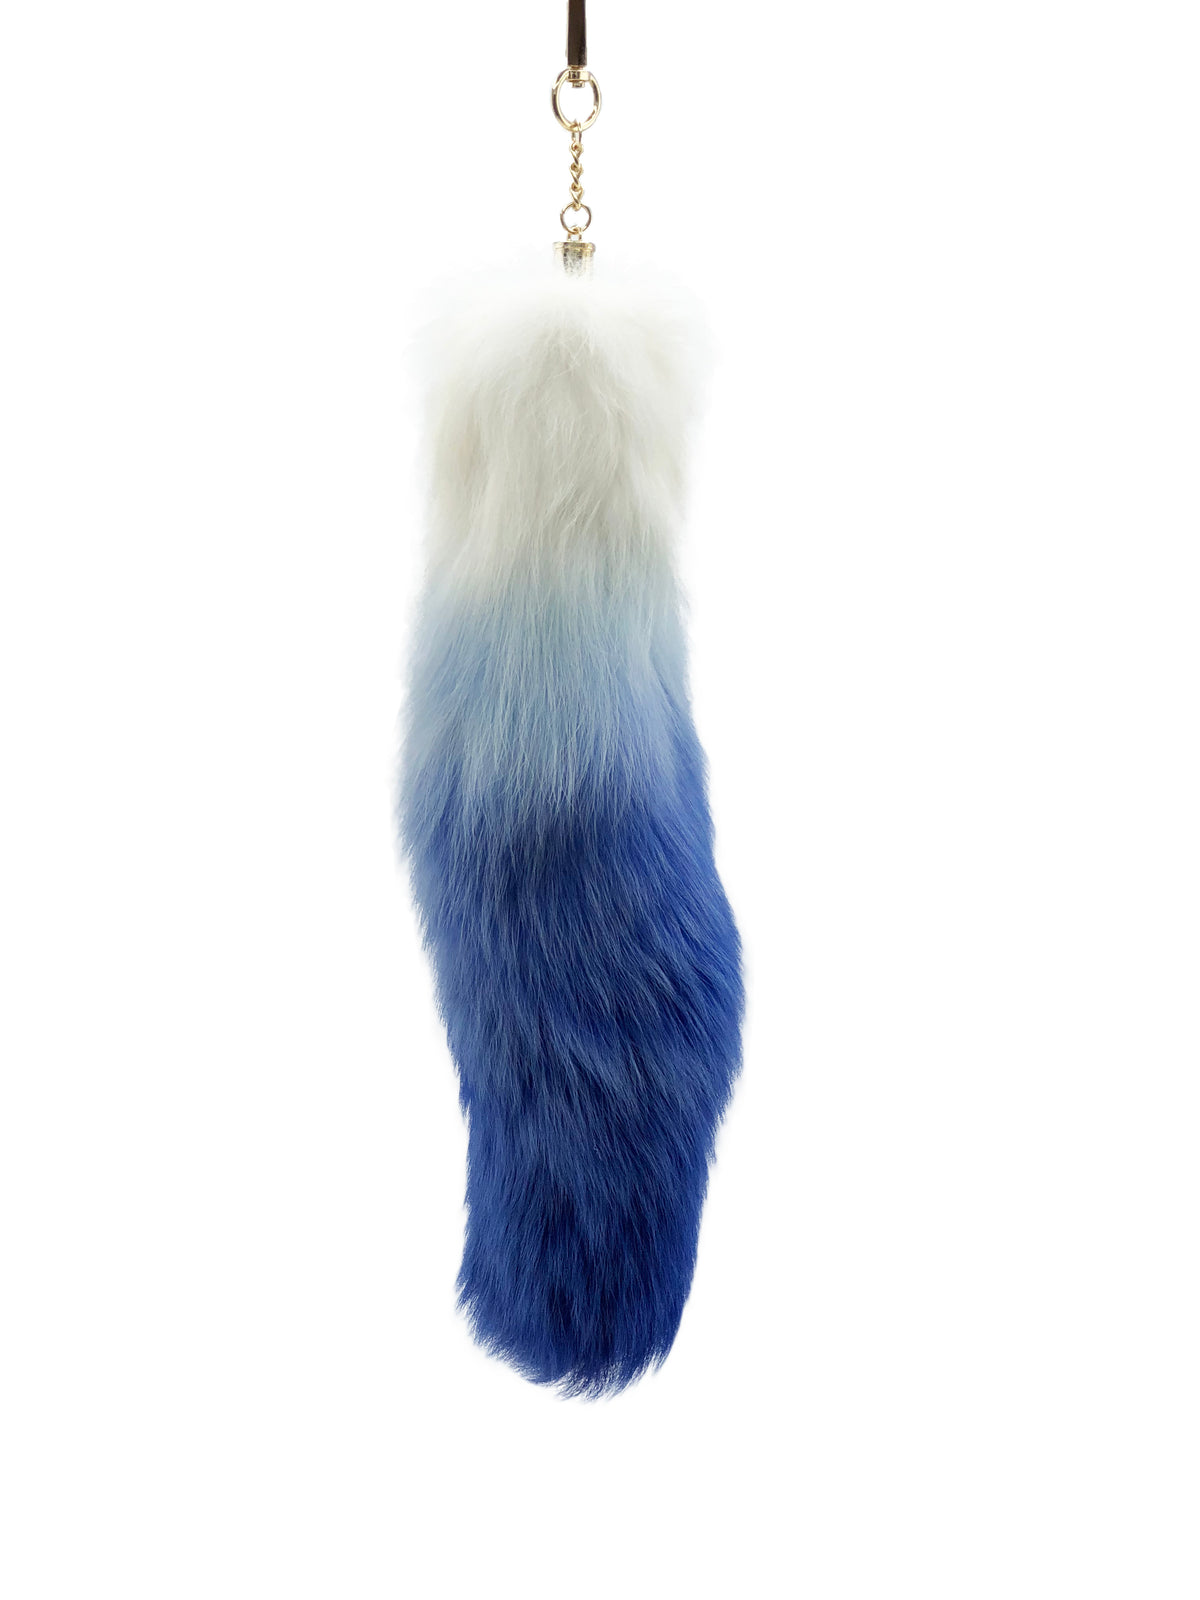 Blue and White Clip-on Fox Tail Keychain - paulamariecollection